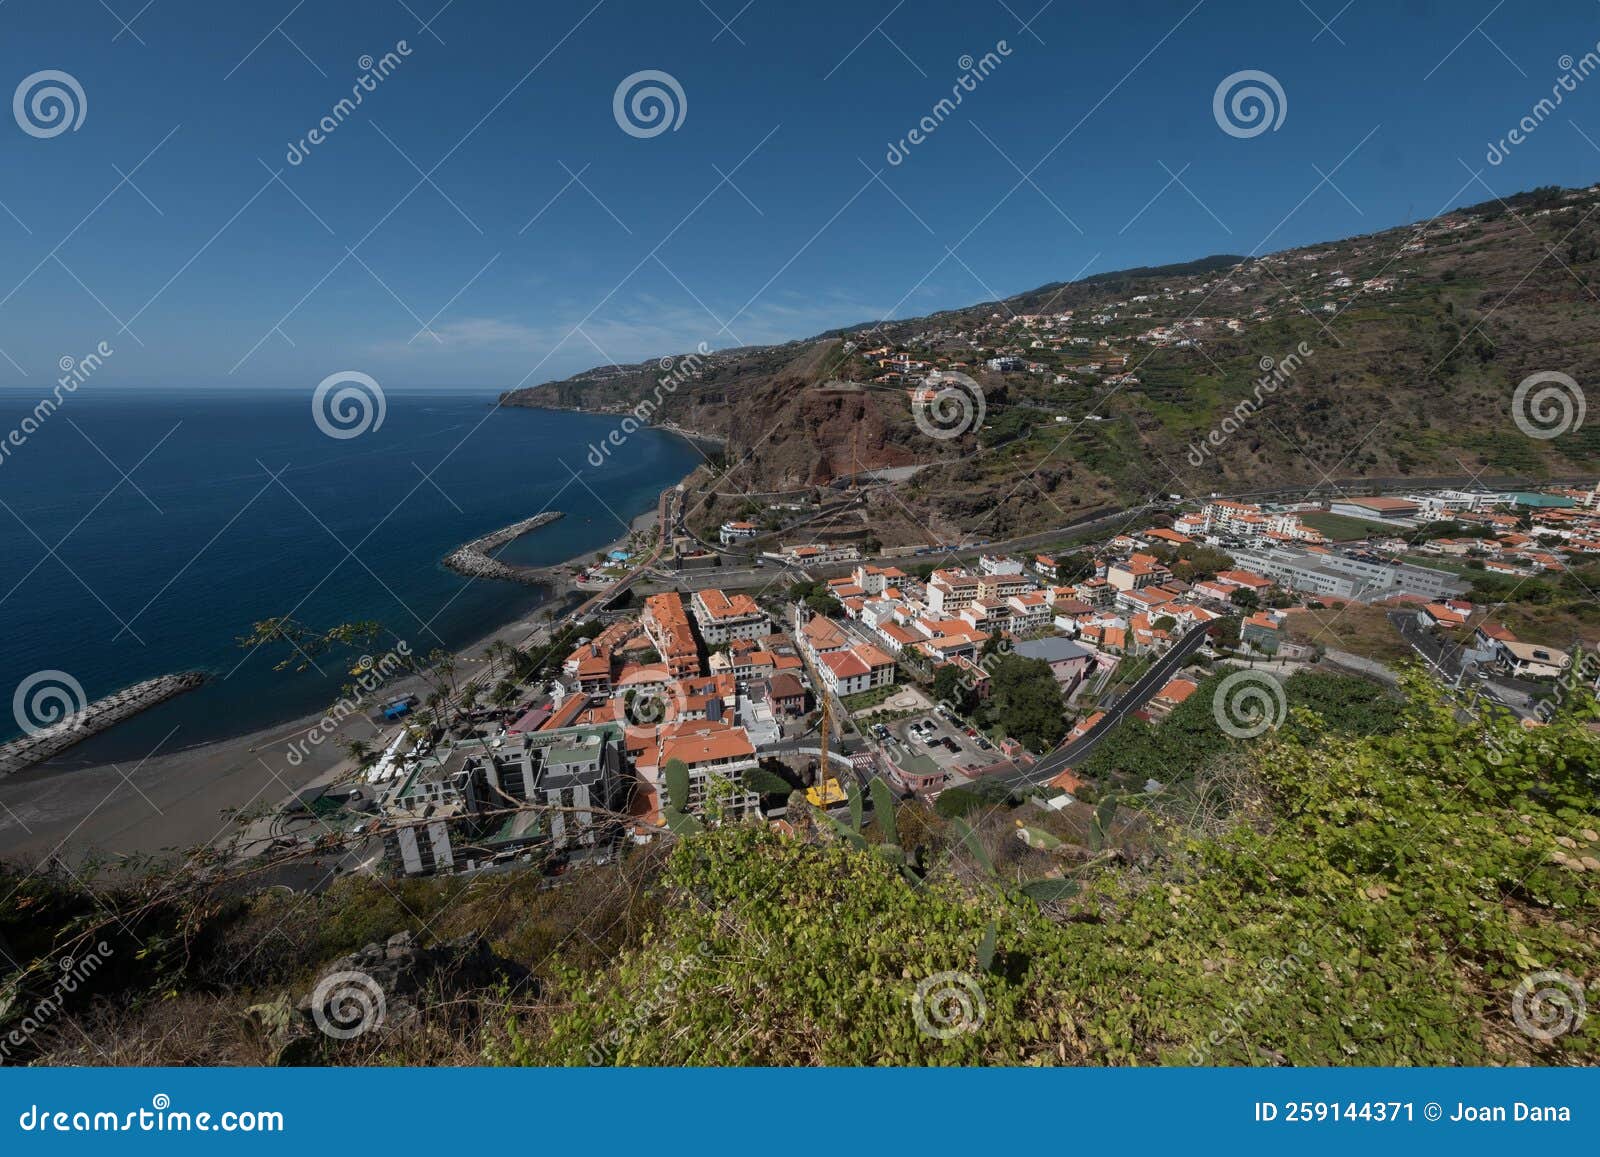 the town of riveira brava from the viewpoint of san sebastian